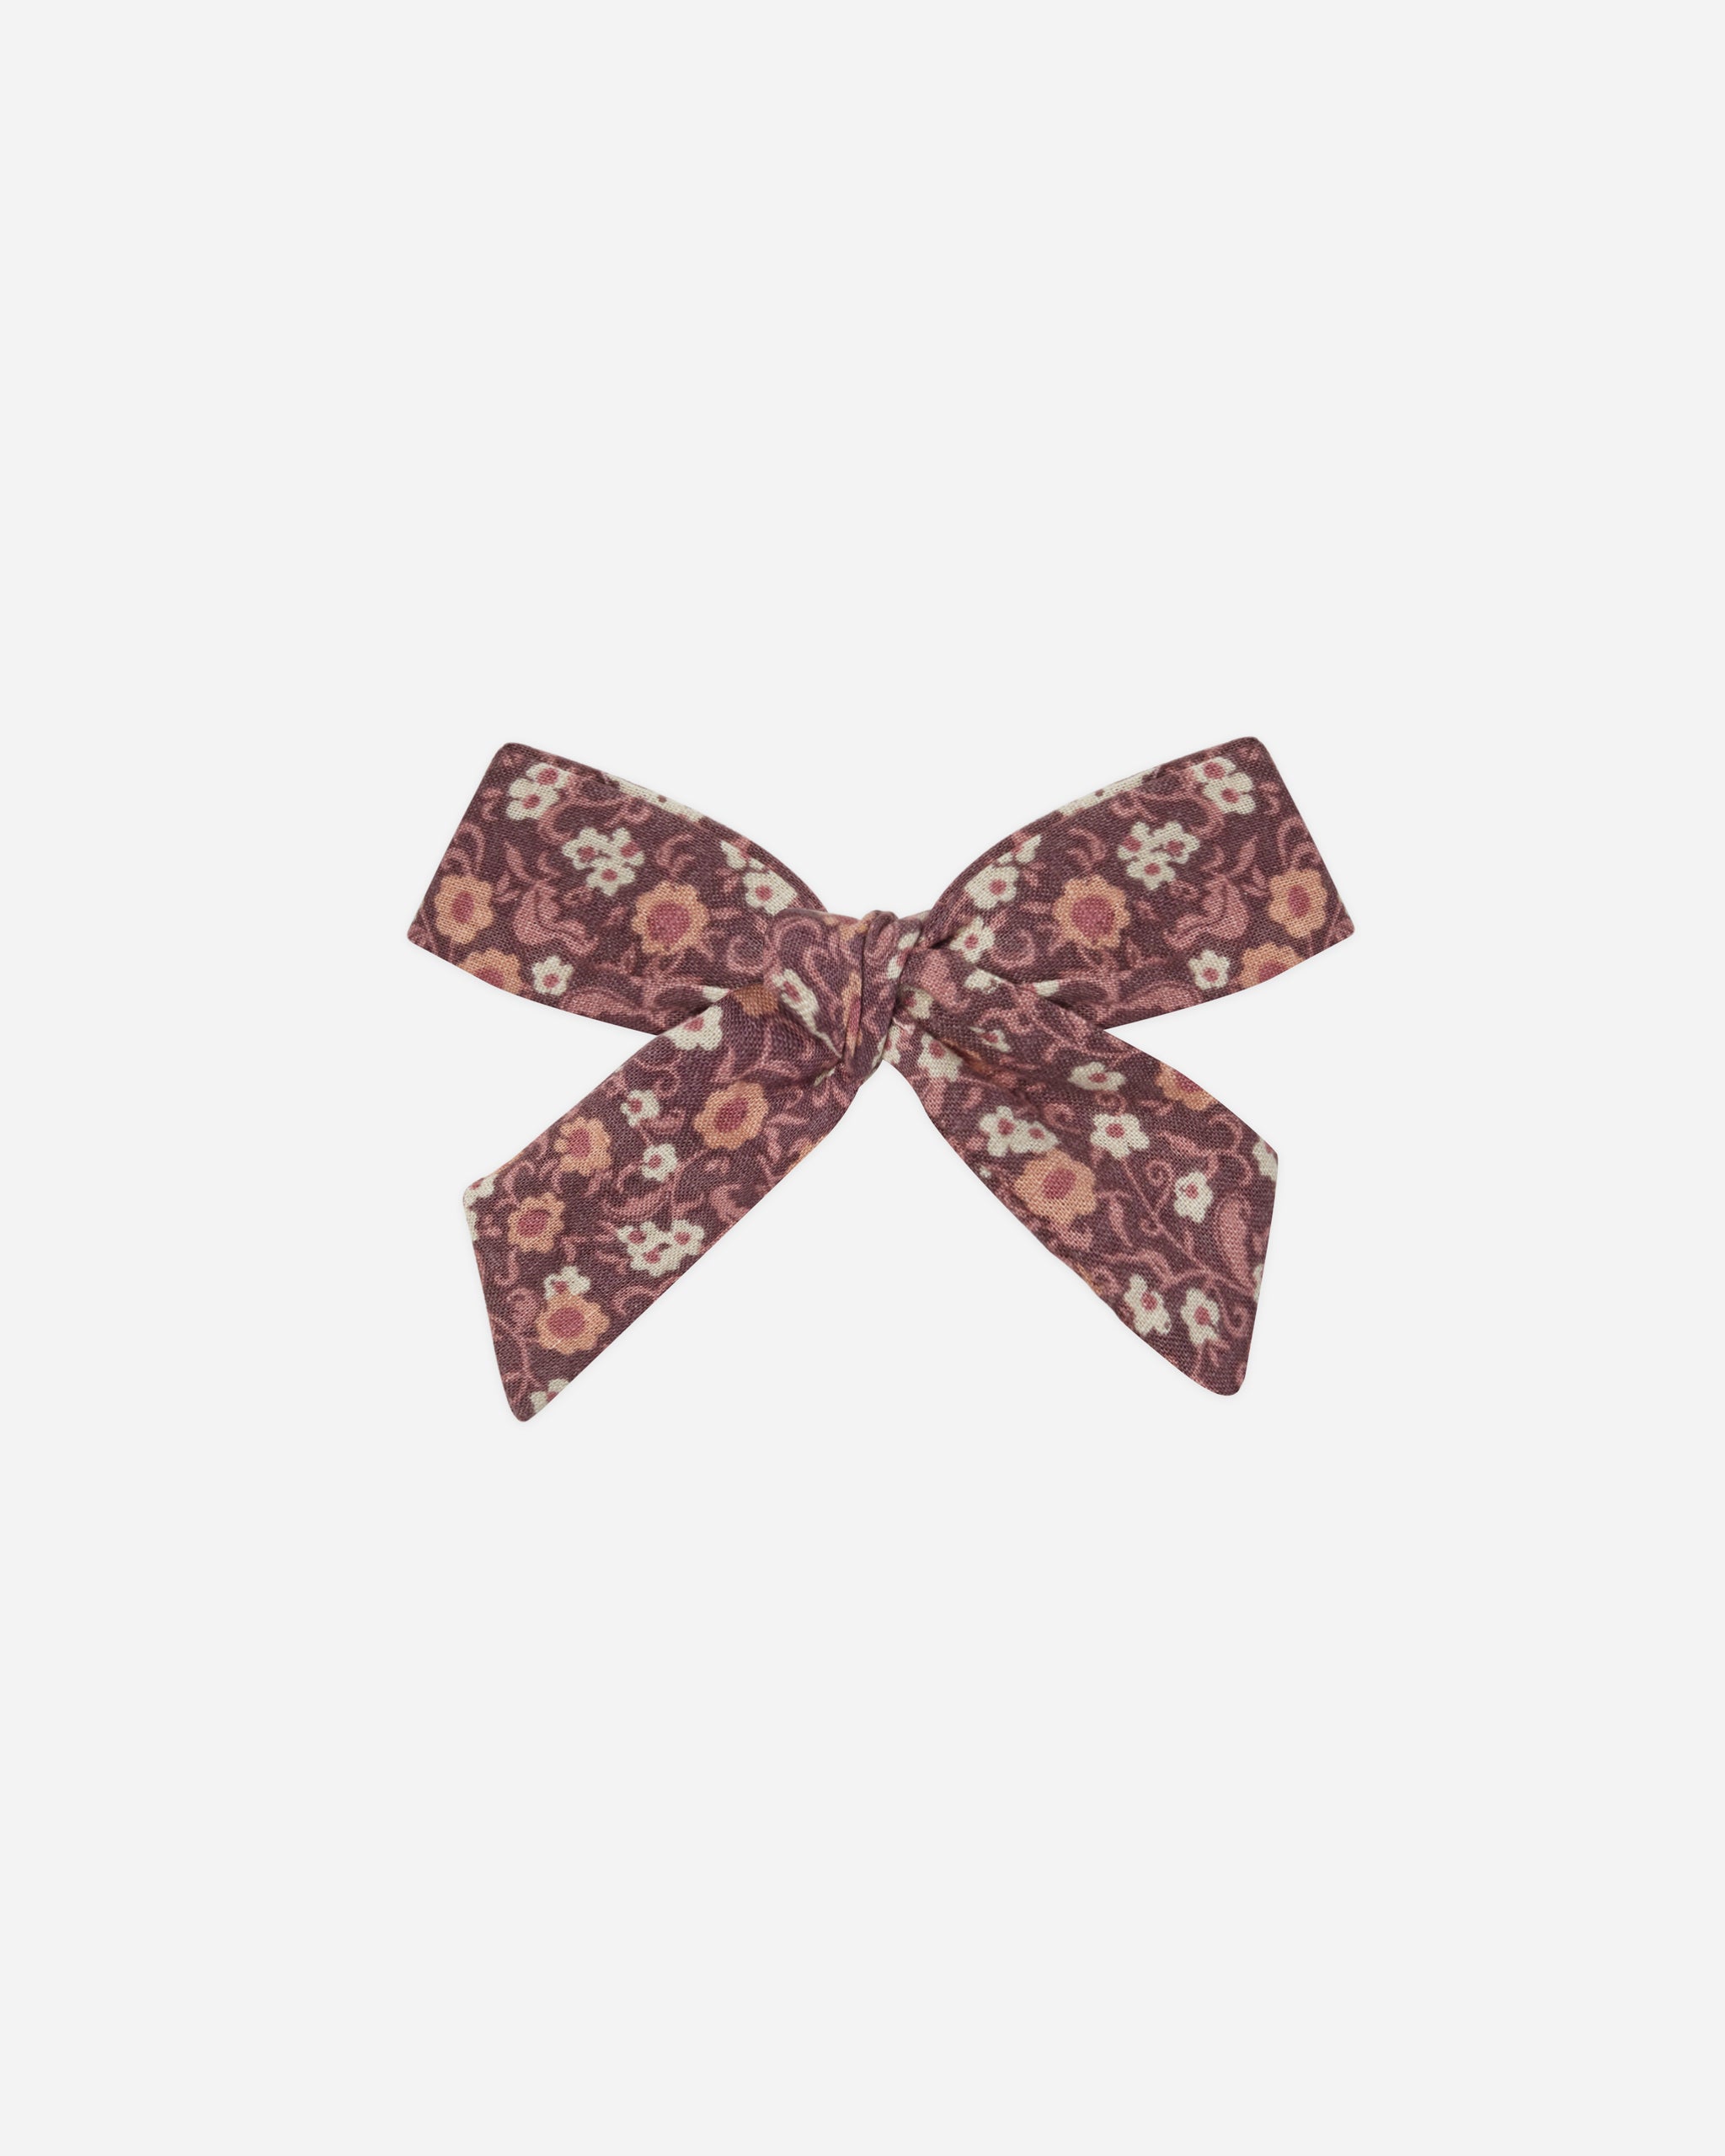 Girl Bow | Plum Floral - Rylee + Cru | Kids Clothes | Trendy Baby Clothes | Modern Infant Outfits |